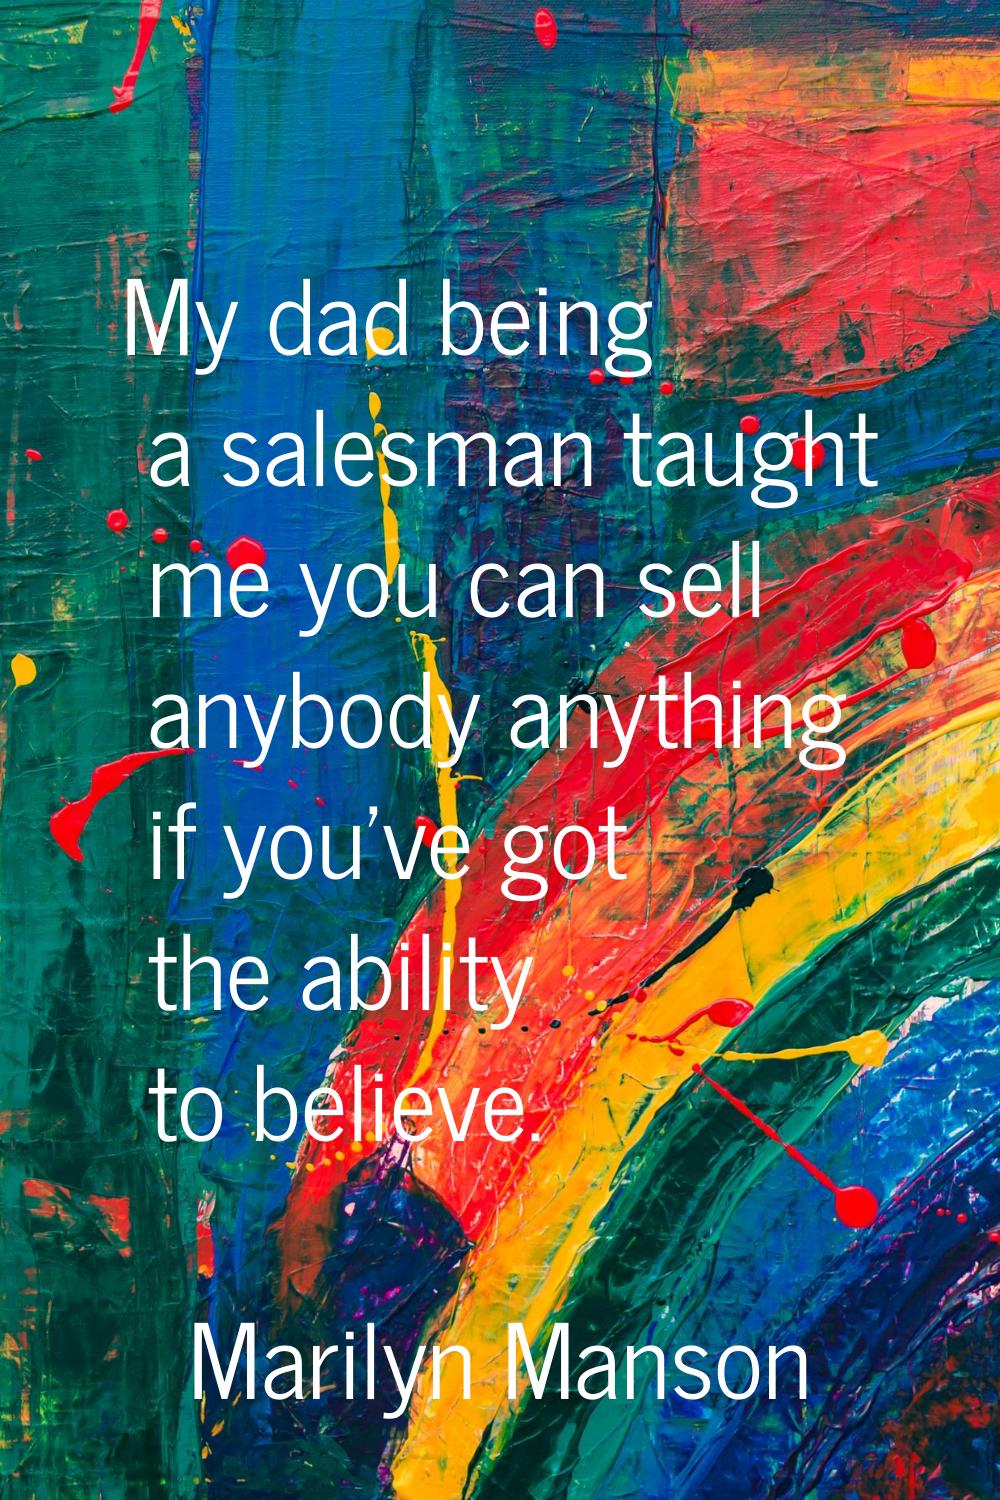 My dad being a salesman taught me you can sell anybody anything if you've got the ability to believ